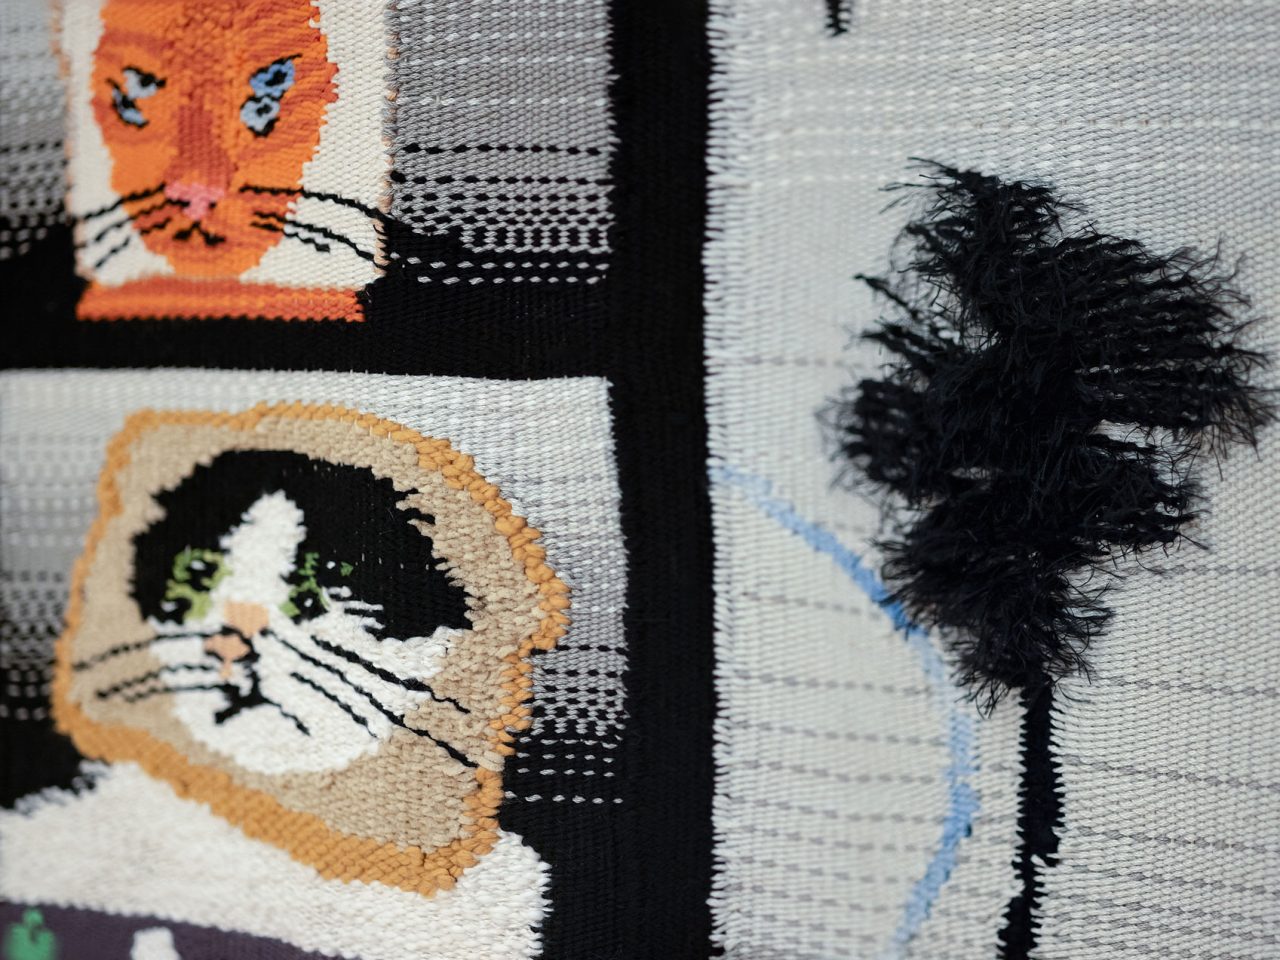 Close up of woven tapestry depicting cats with their face in a slice of bread